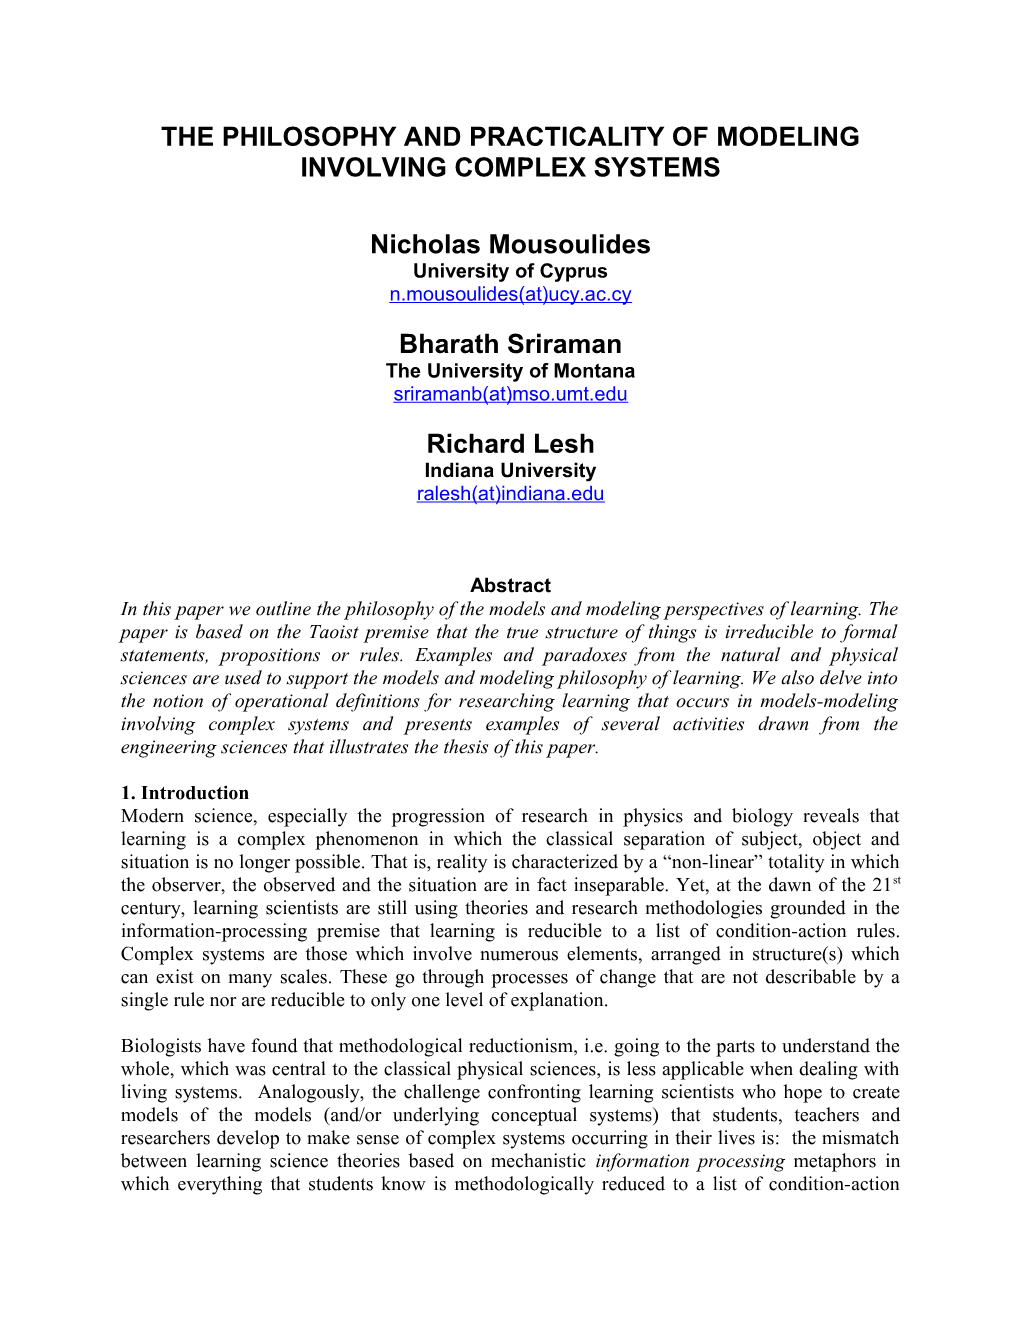 The Philosophy of Practicality of Modeling Involving Complex Systems